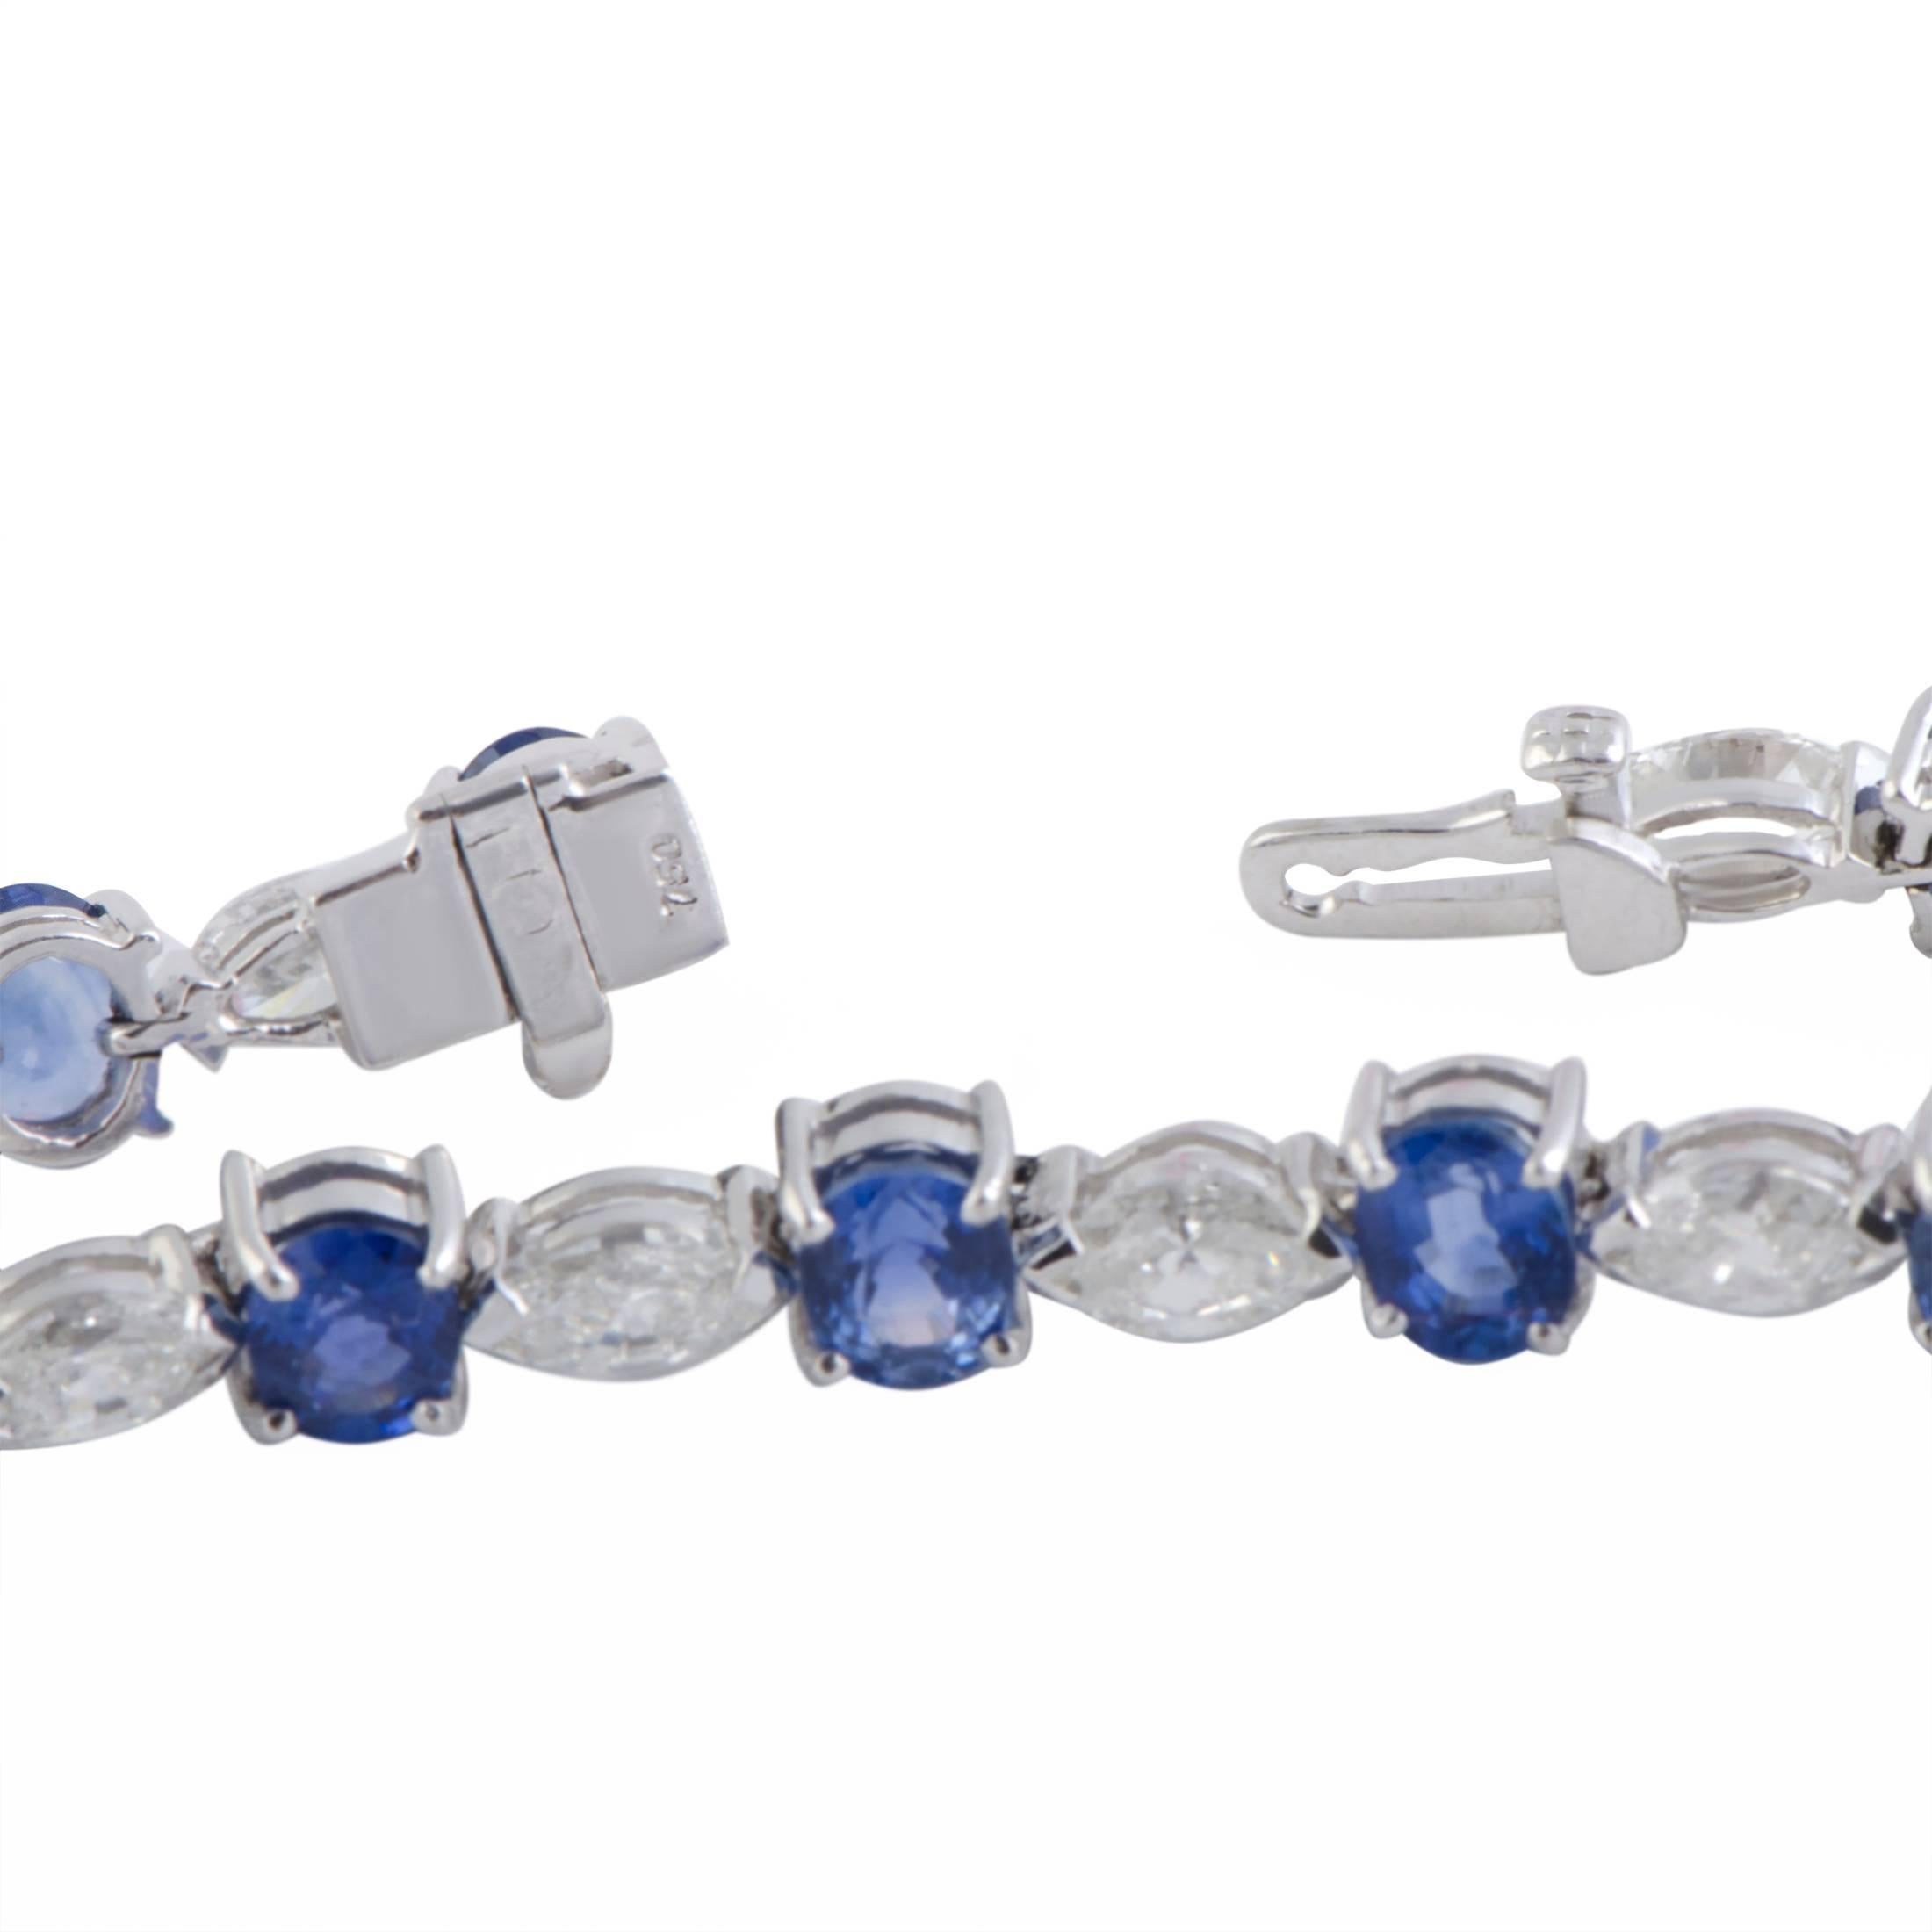 Luxuriously set with diamond and sapphire stones, this sublime bracelet offers a look of utmost class and refinement. The bracelet is made of elegant 18K white gold and boasts a total of 8.00 carats of sapphires and approximately 4.00 carats of